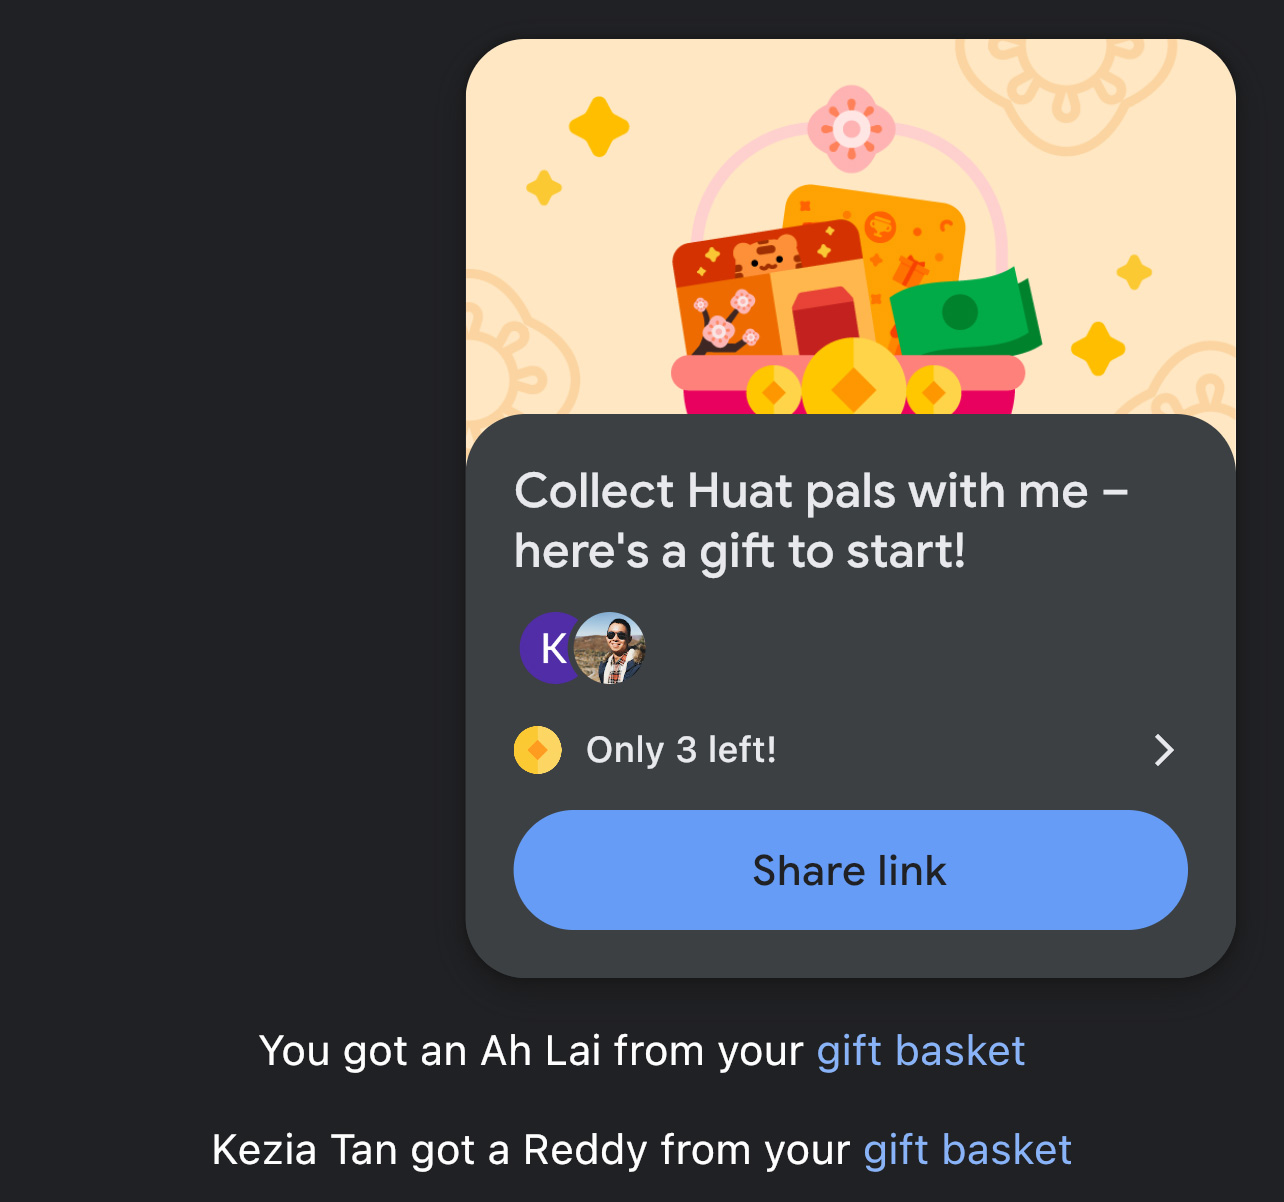 Google Pay's 2023 Huat Pals return with new rewards and minigames